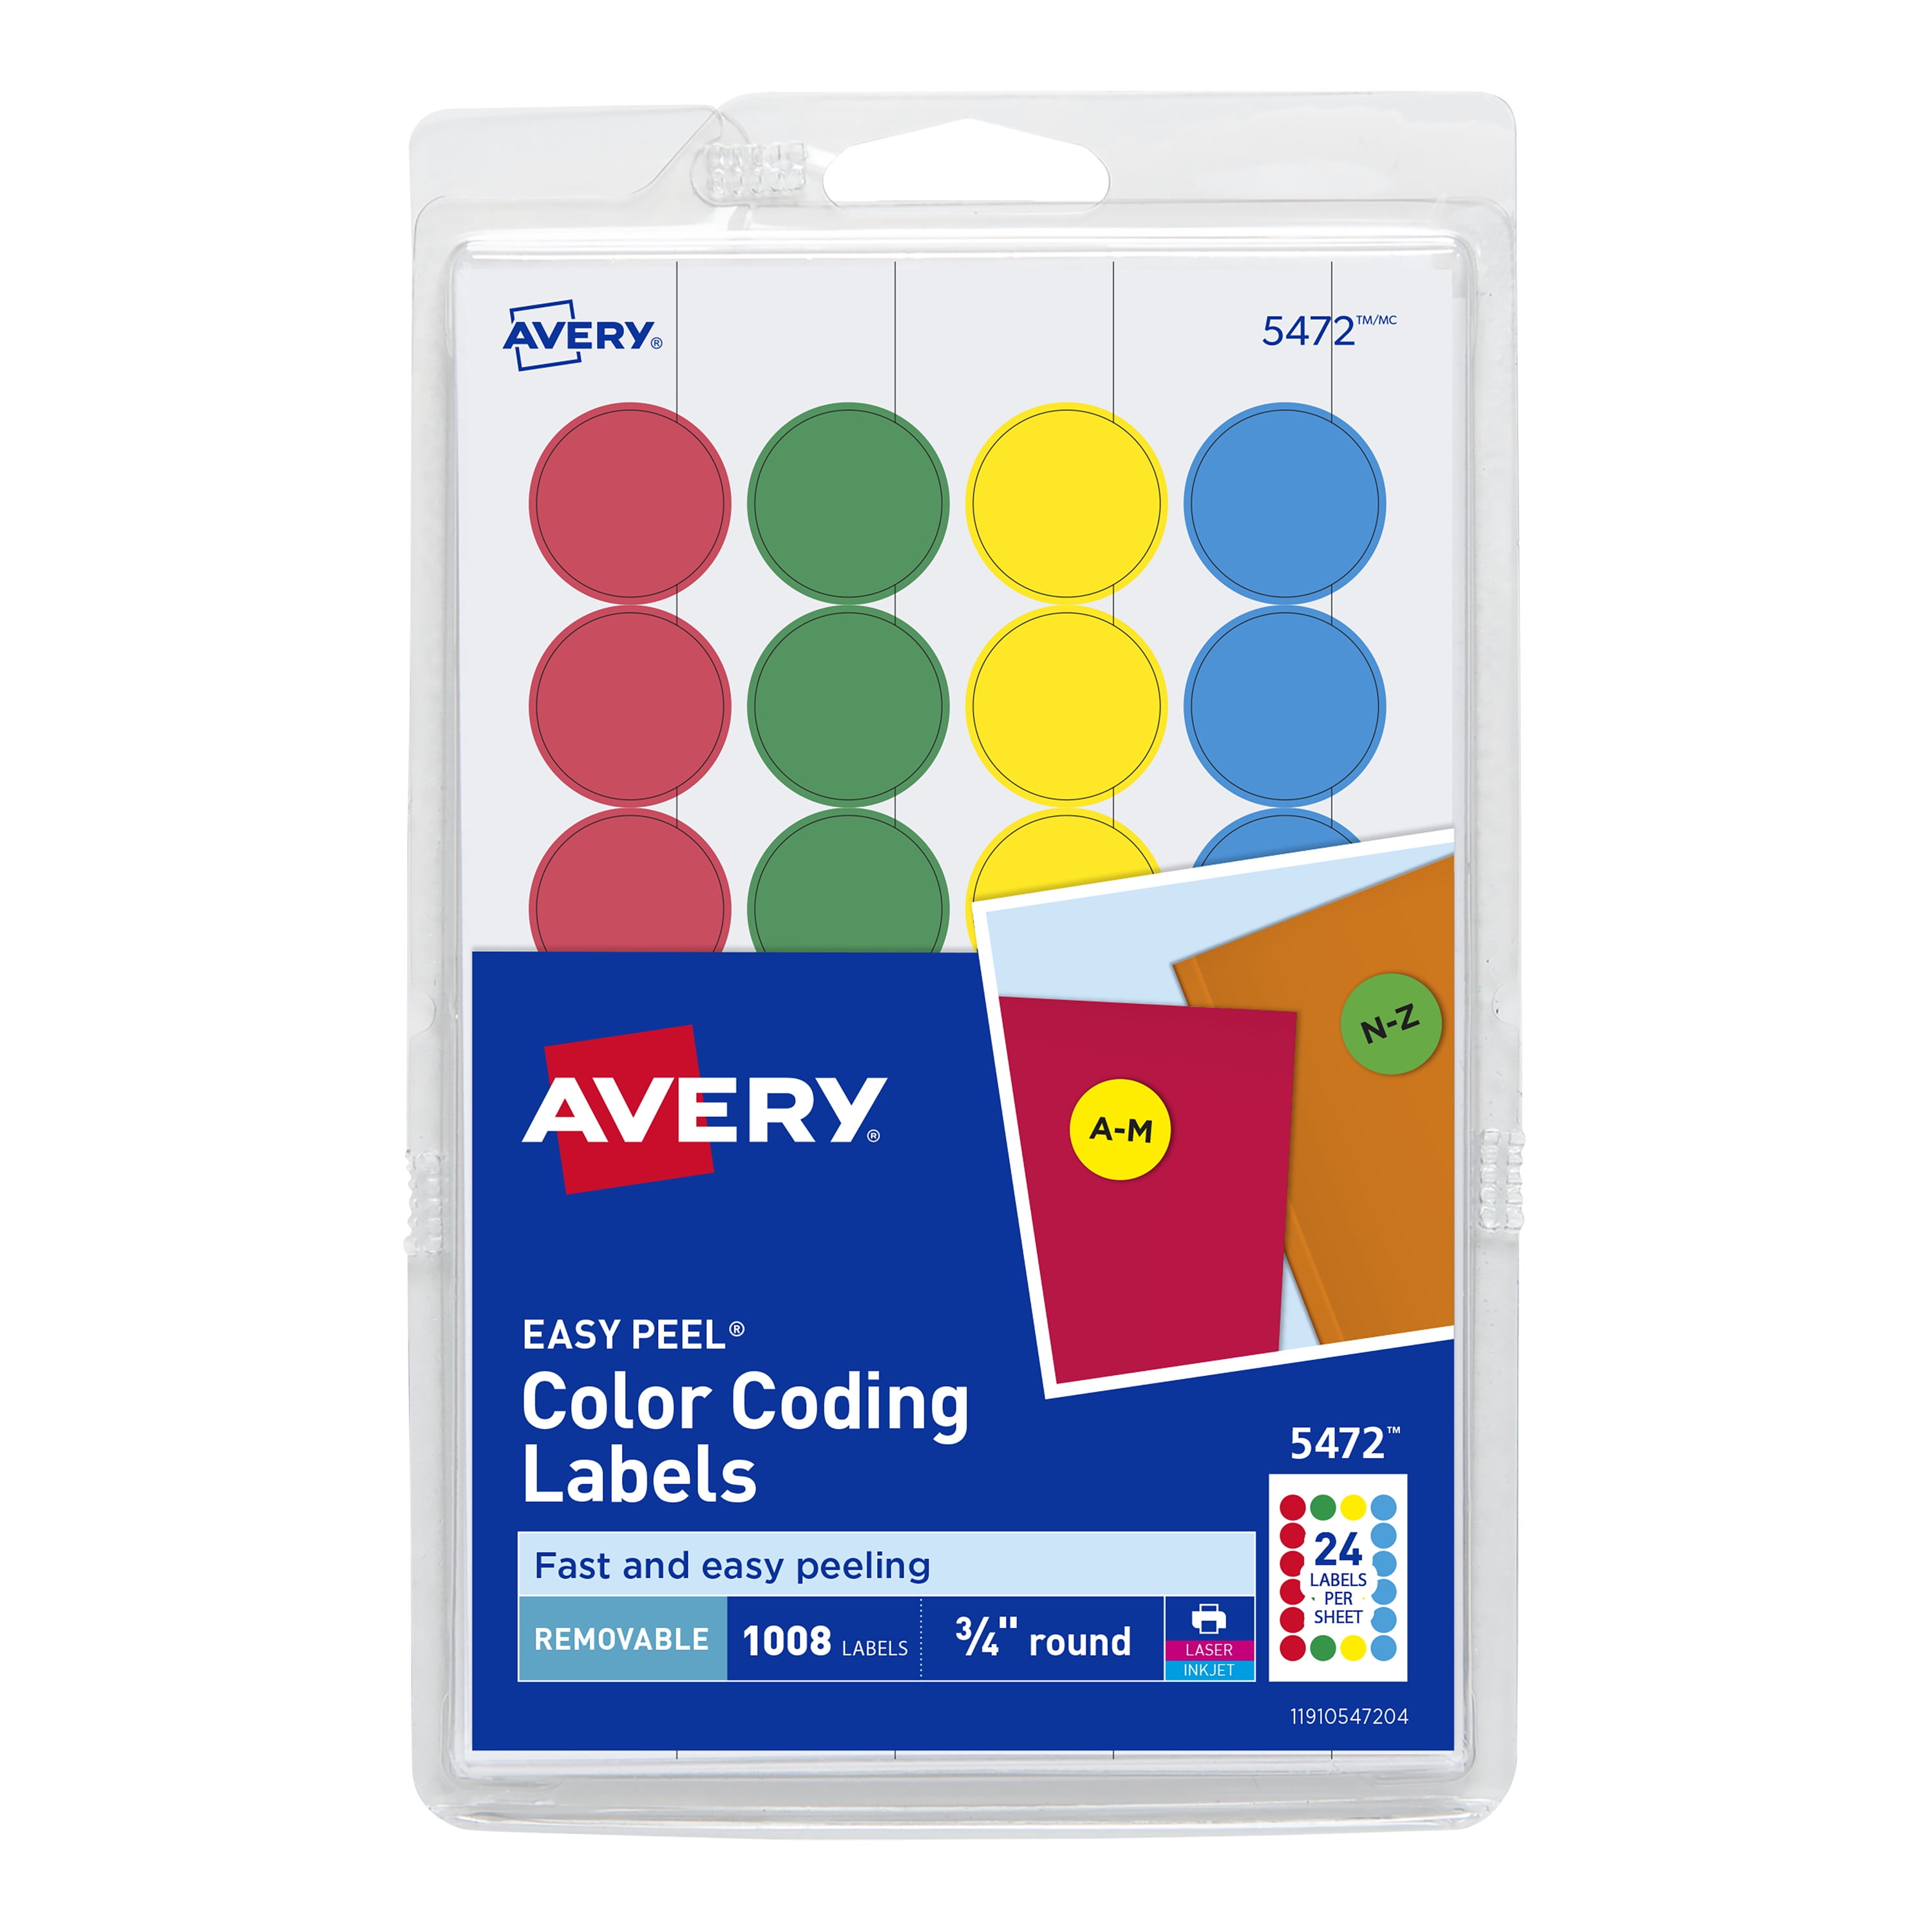 10 Assorted Bright Colors 2640 Pcs 3/4 Round Colour Coding Circle Dots Stickers Labels Permanent Adhesive 